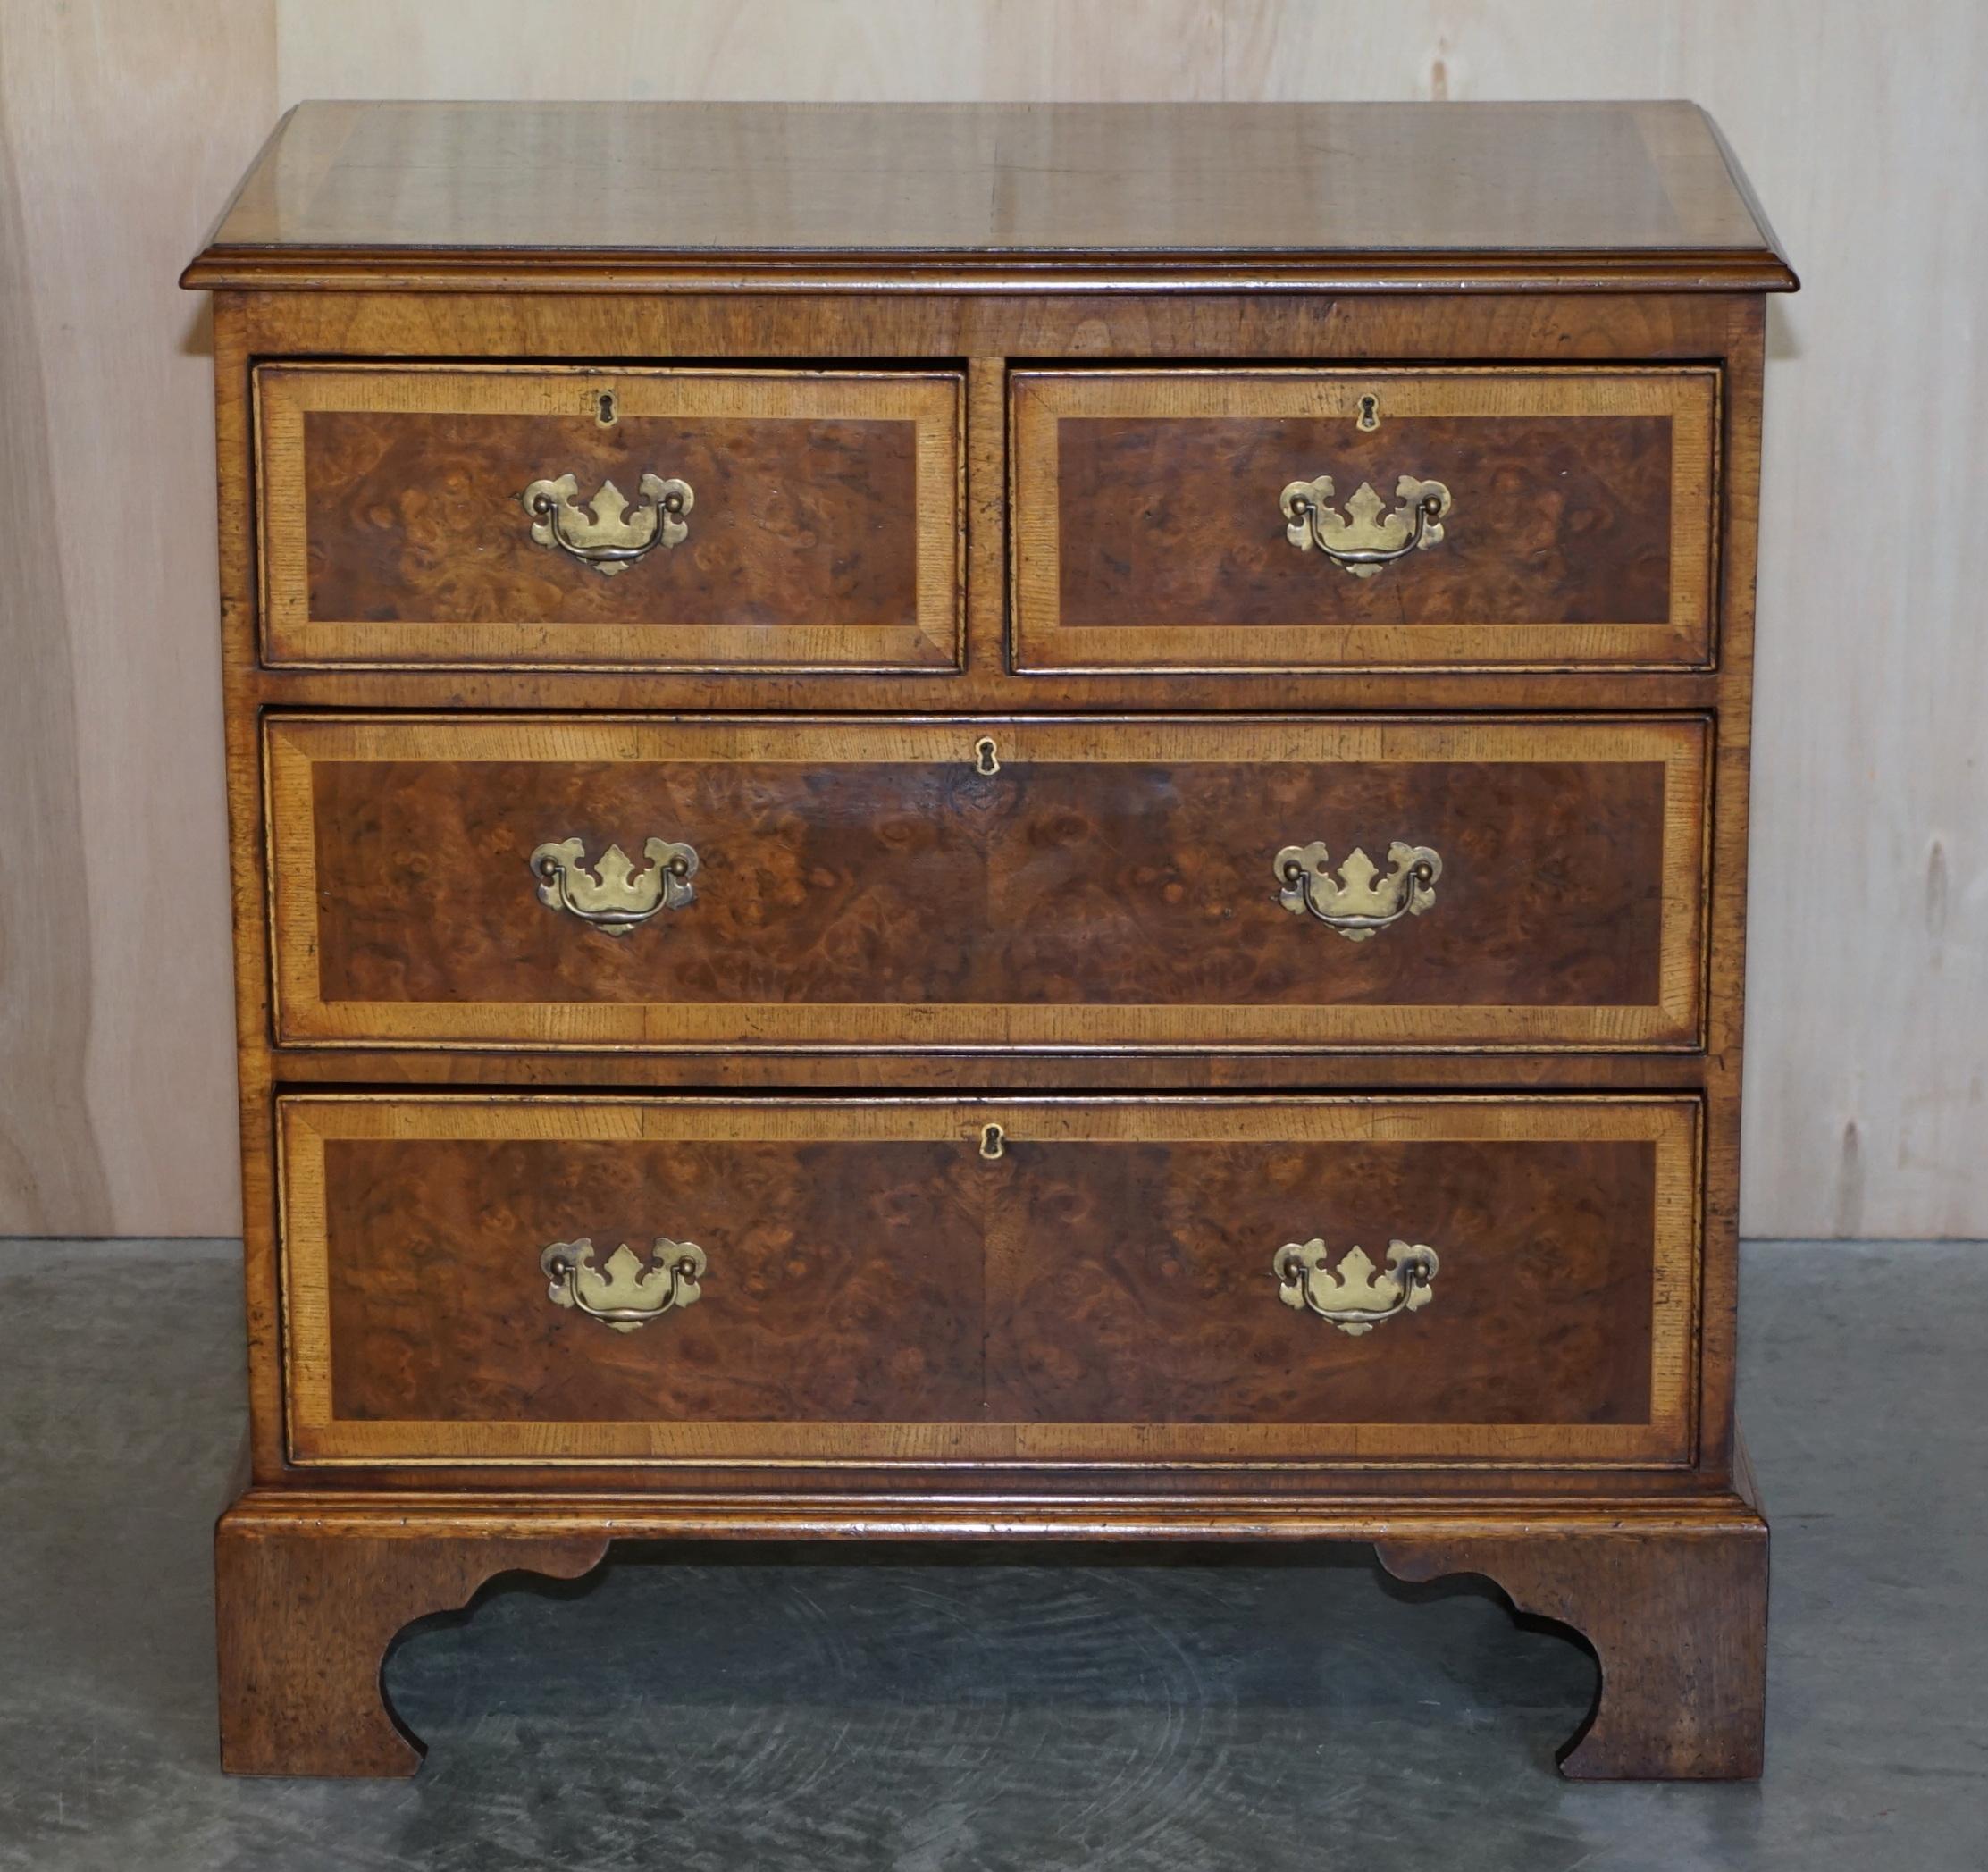 Hand-Crafted Pair of Stunning circa 1900 Antique Burr Walnut Georgian Taste Chests of Drawers